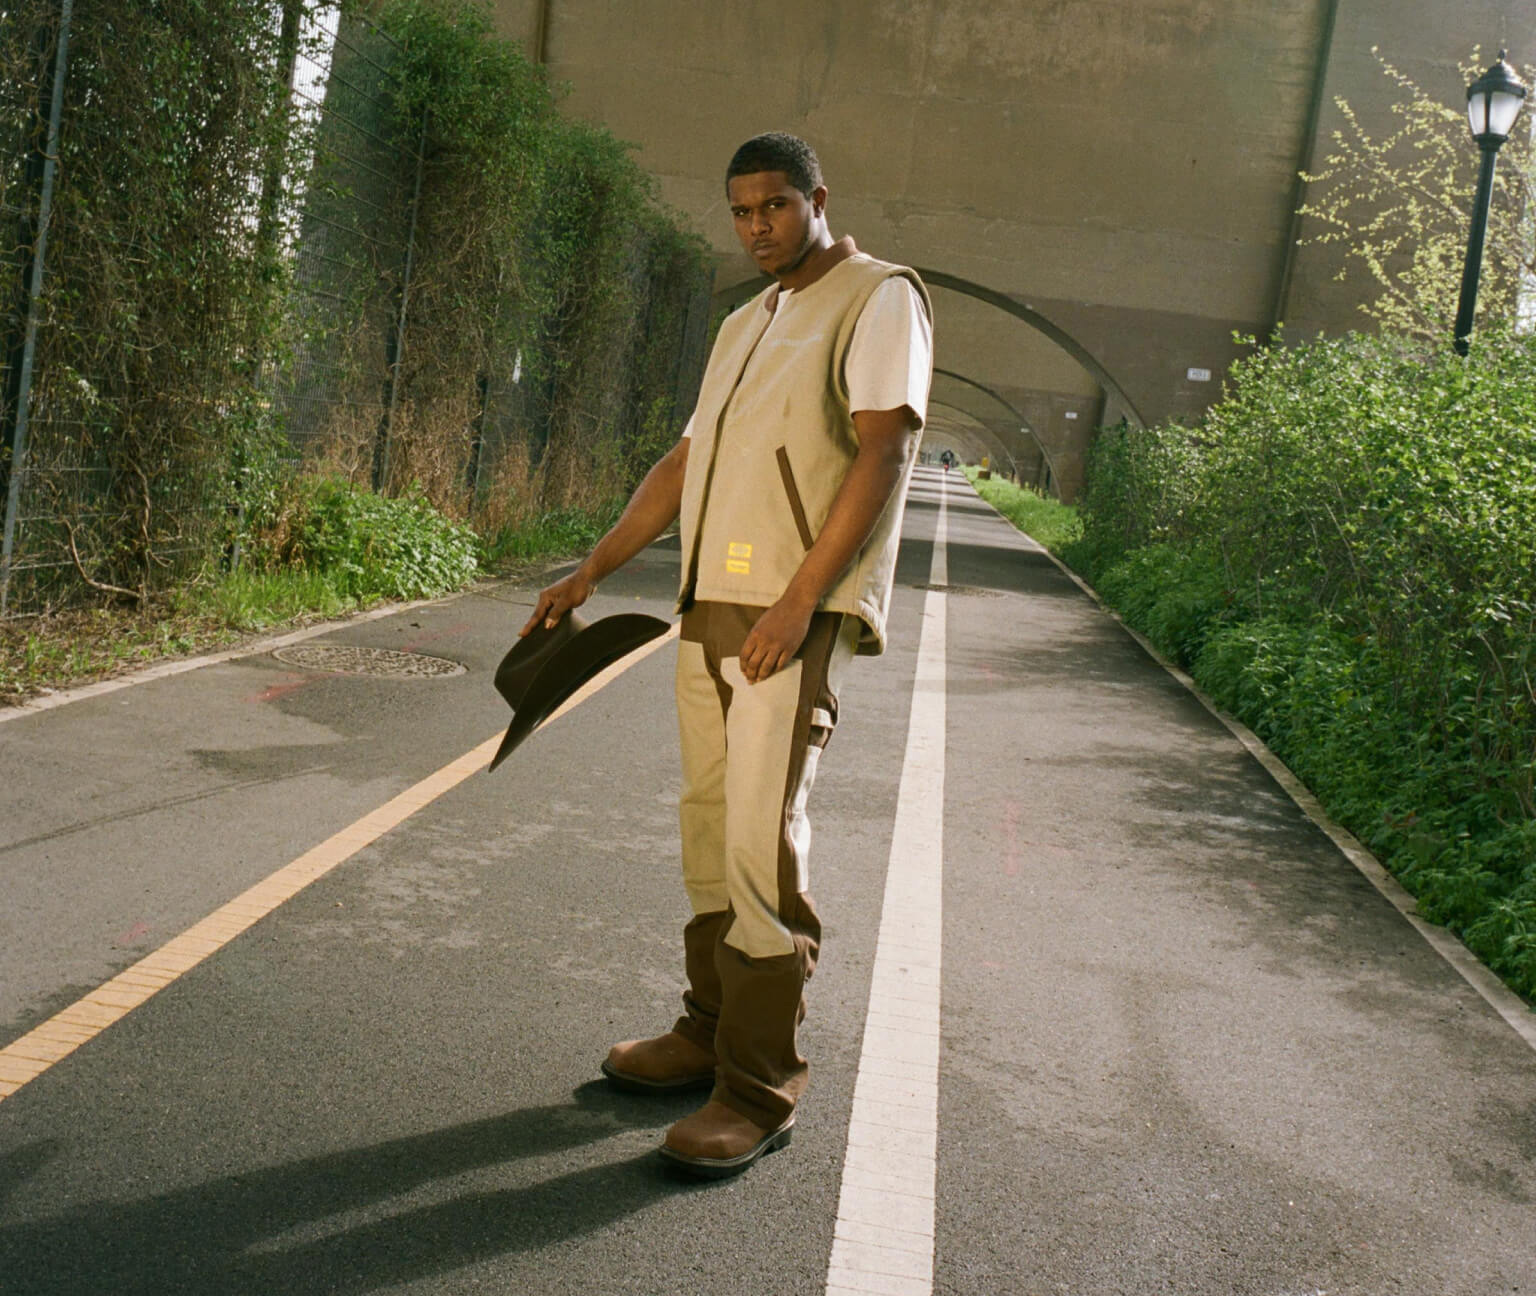 A man standing on a sidewalk wearing new york sunshine and dickies clothing